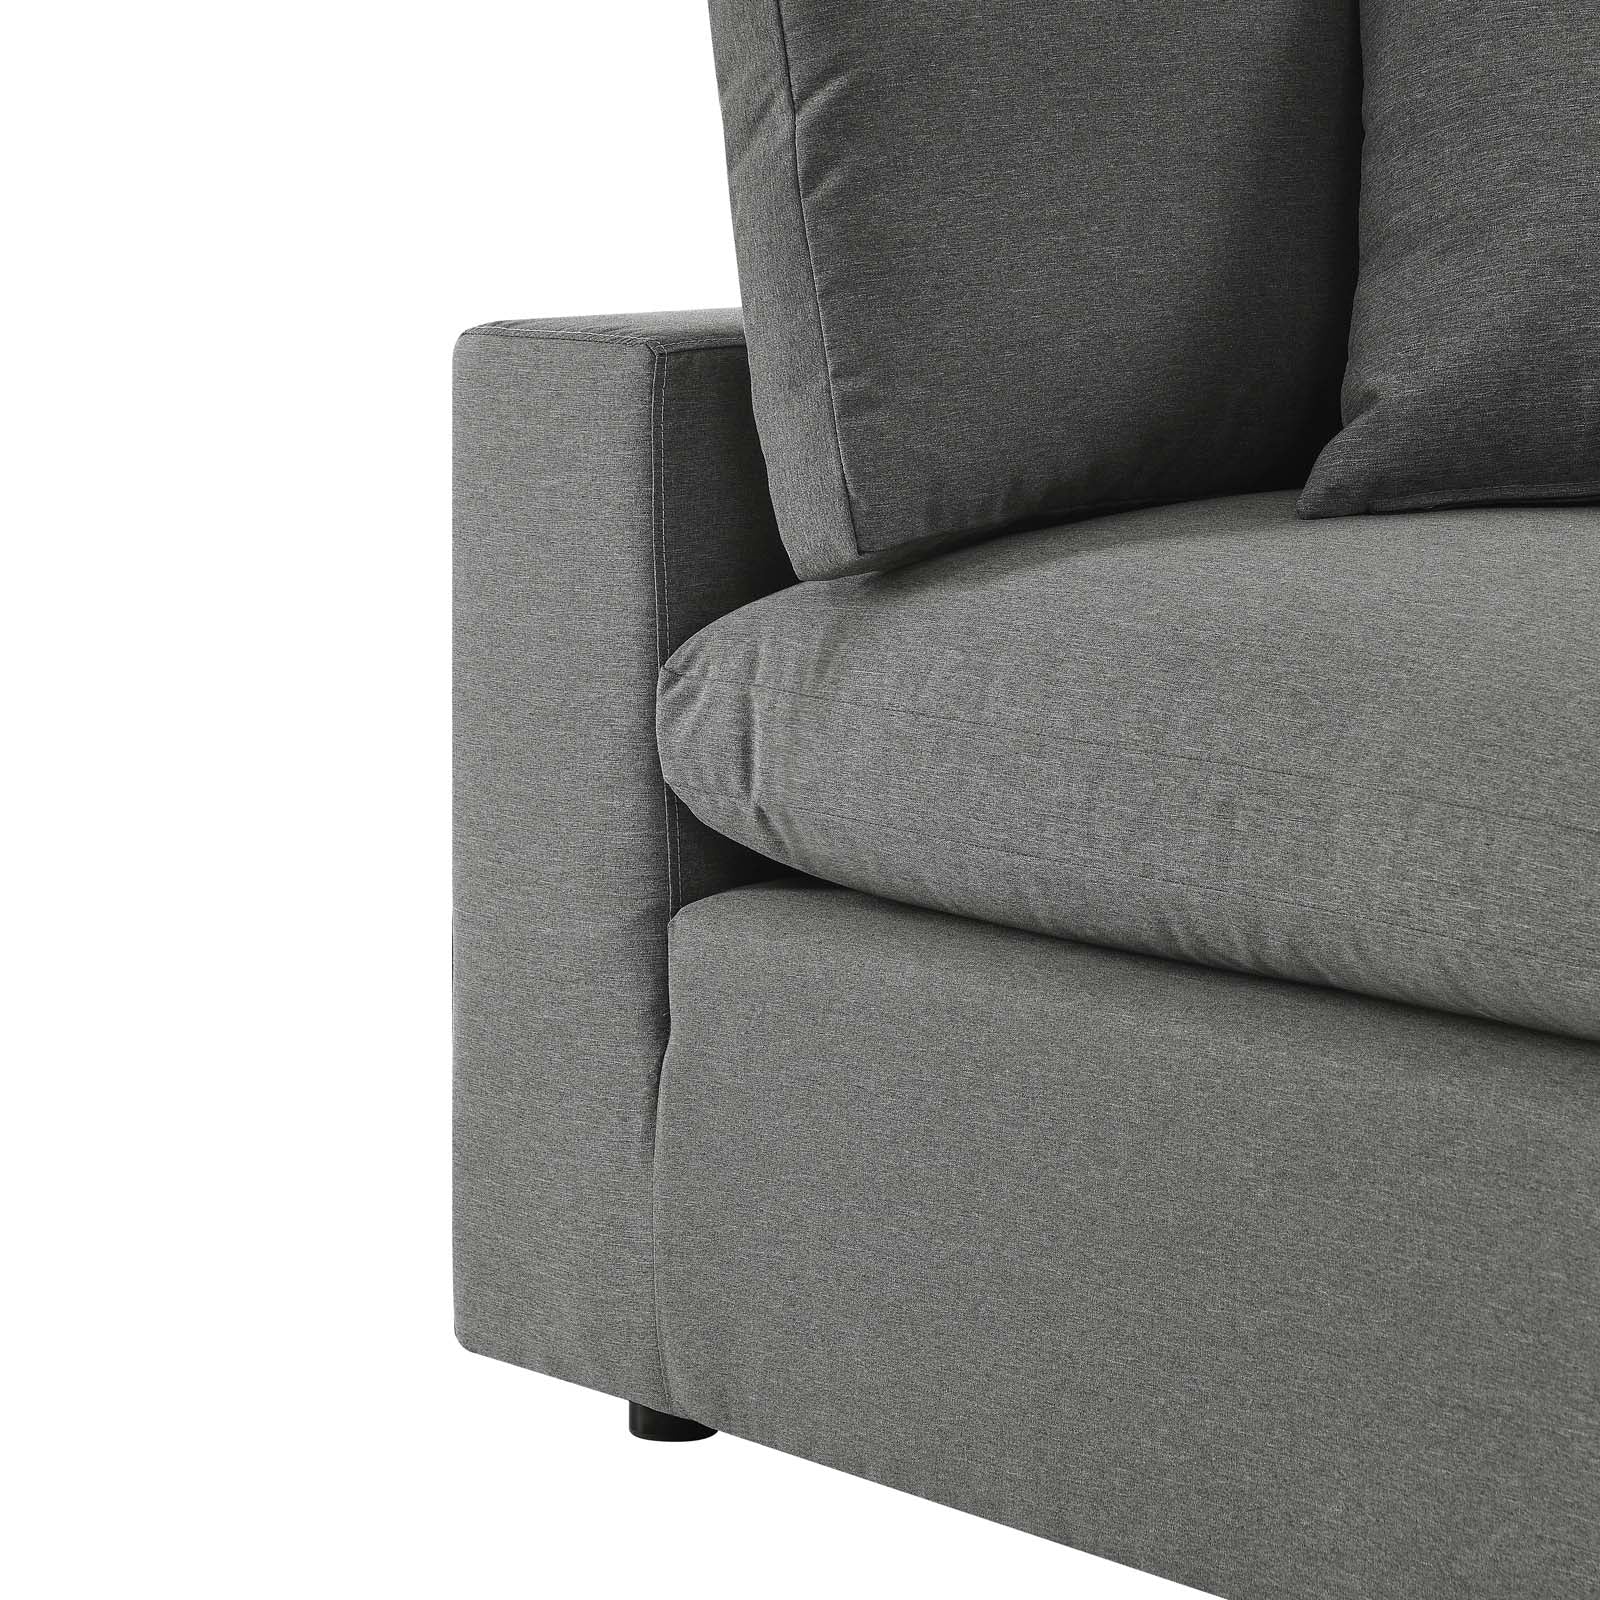 Commix Overstuffed Outdoor Patio Armless Chair